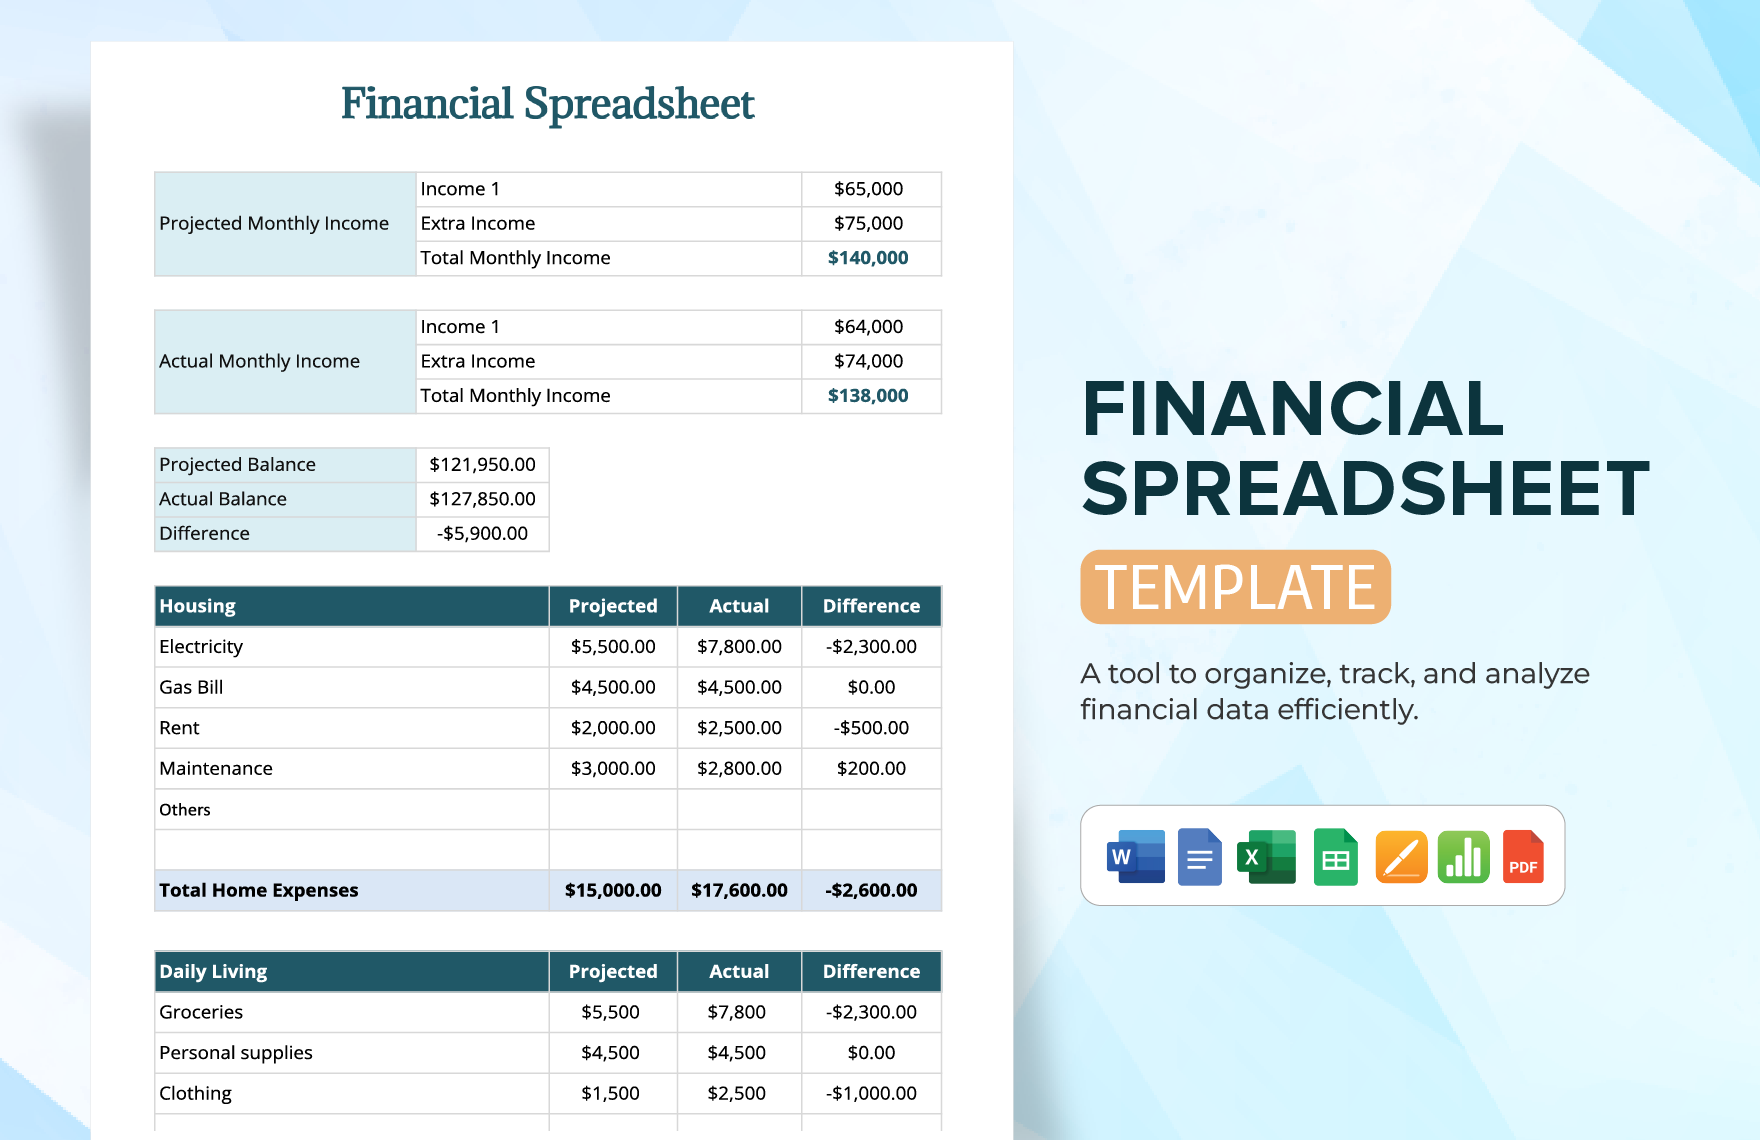 Financial Spreadsheet Template in Word, Google Docs, Excel, PDF, Google Sheets, Apple Pages, Apple Numbers